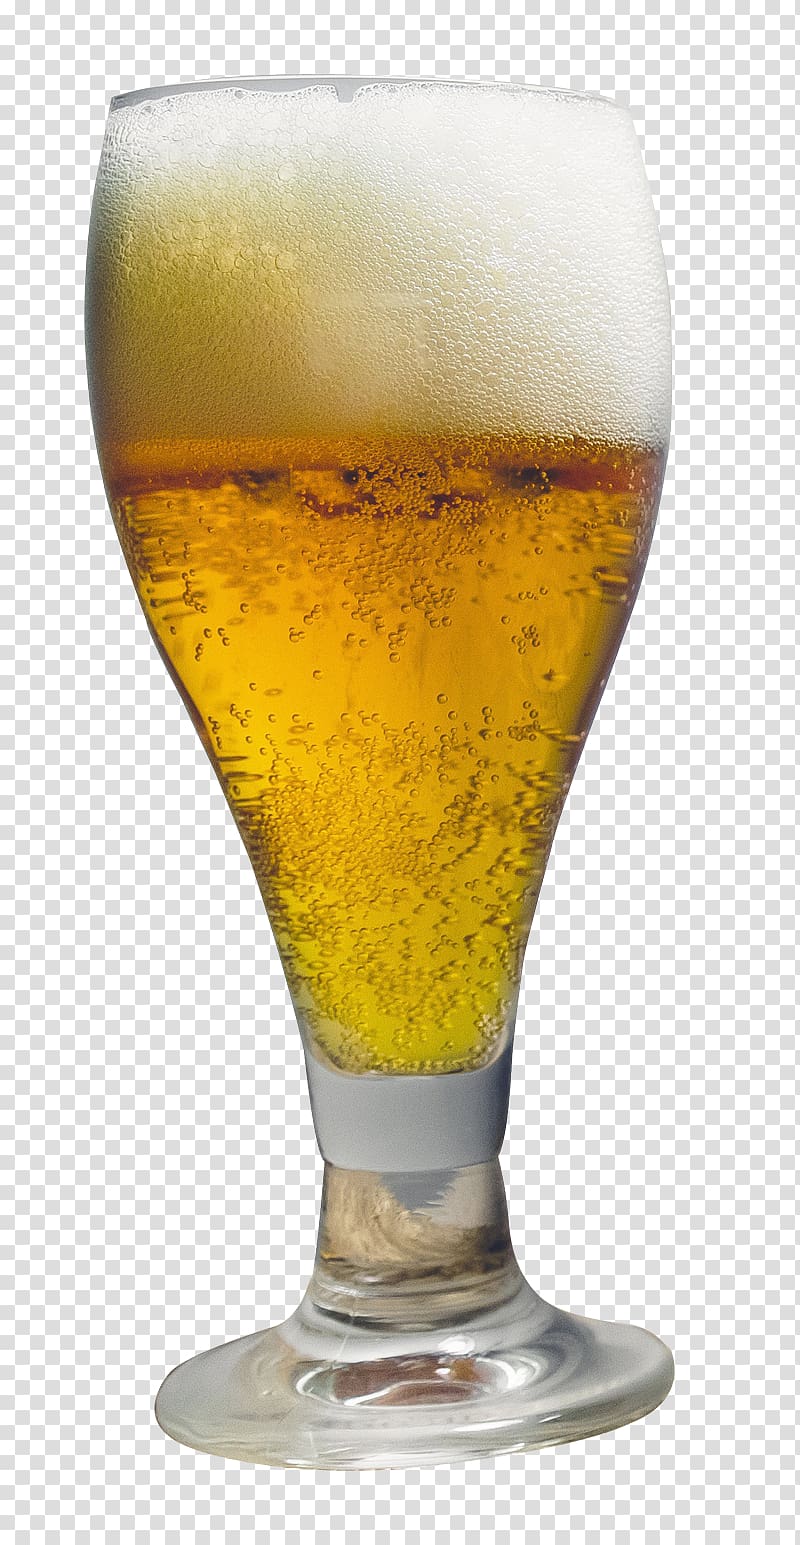 Beer glassware Cup, Beer Glass transparent background PNG clipart